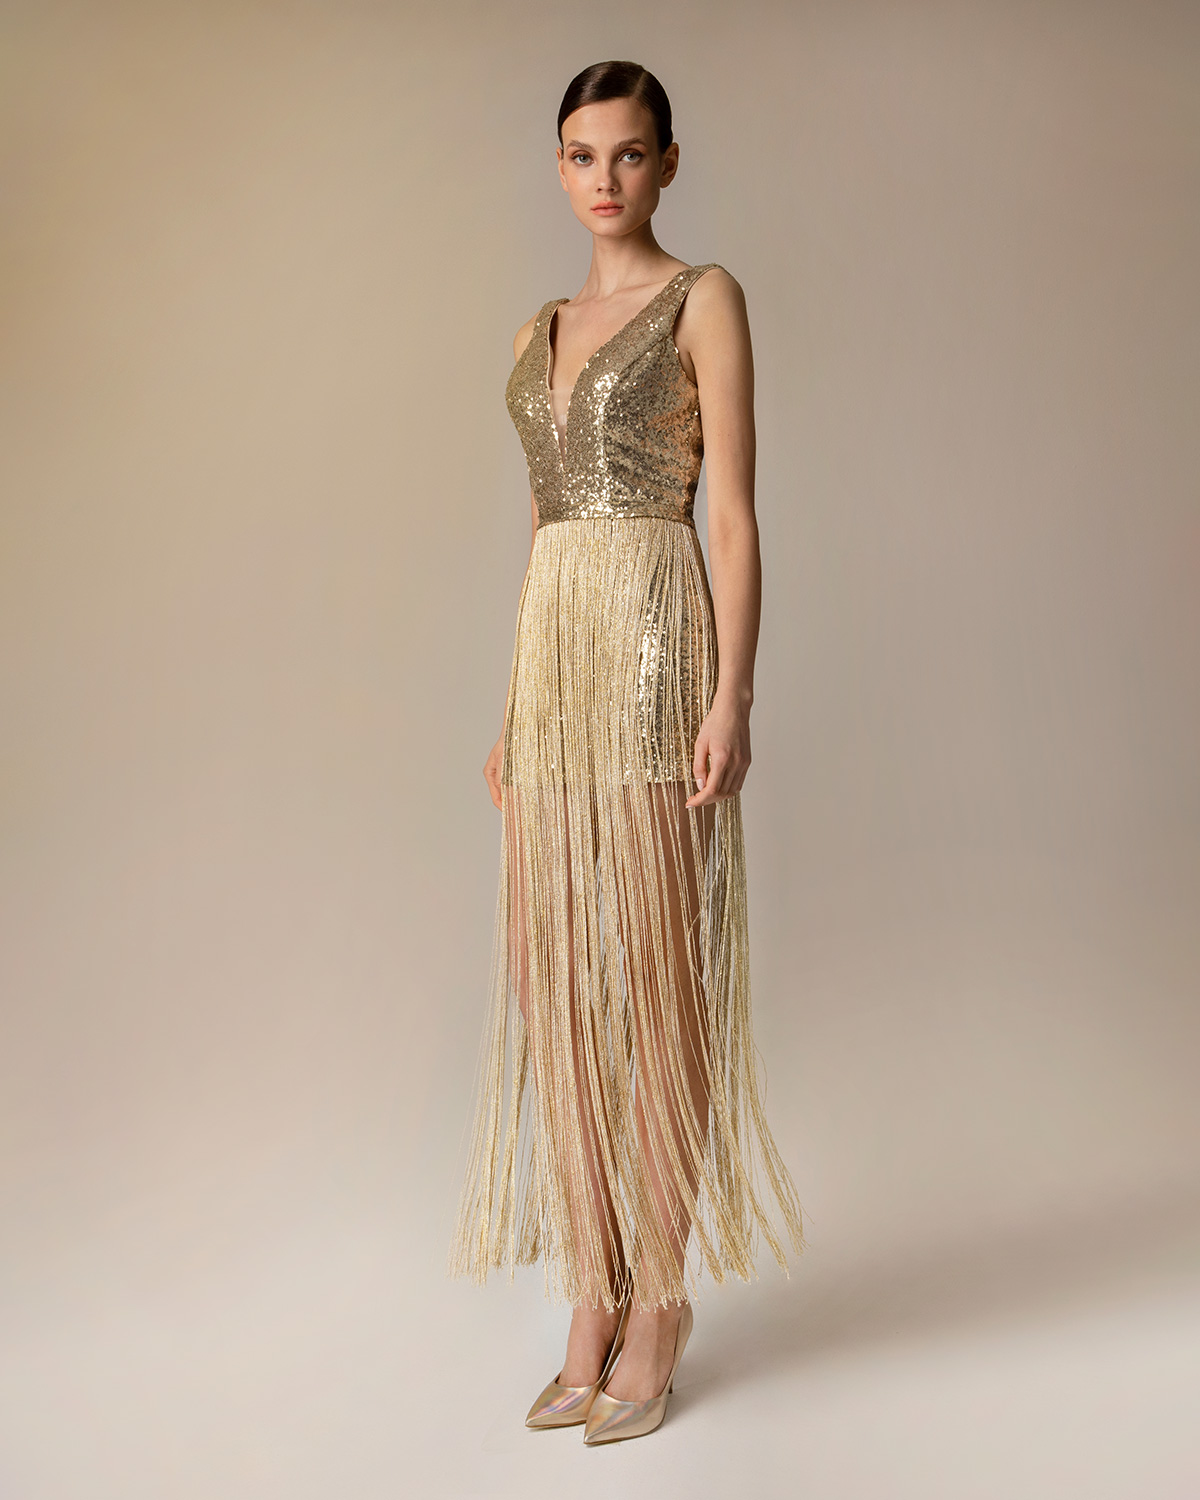 Вечерние платья / Short evening fully beaded dress with sequence and skirt with fringed